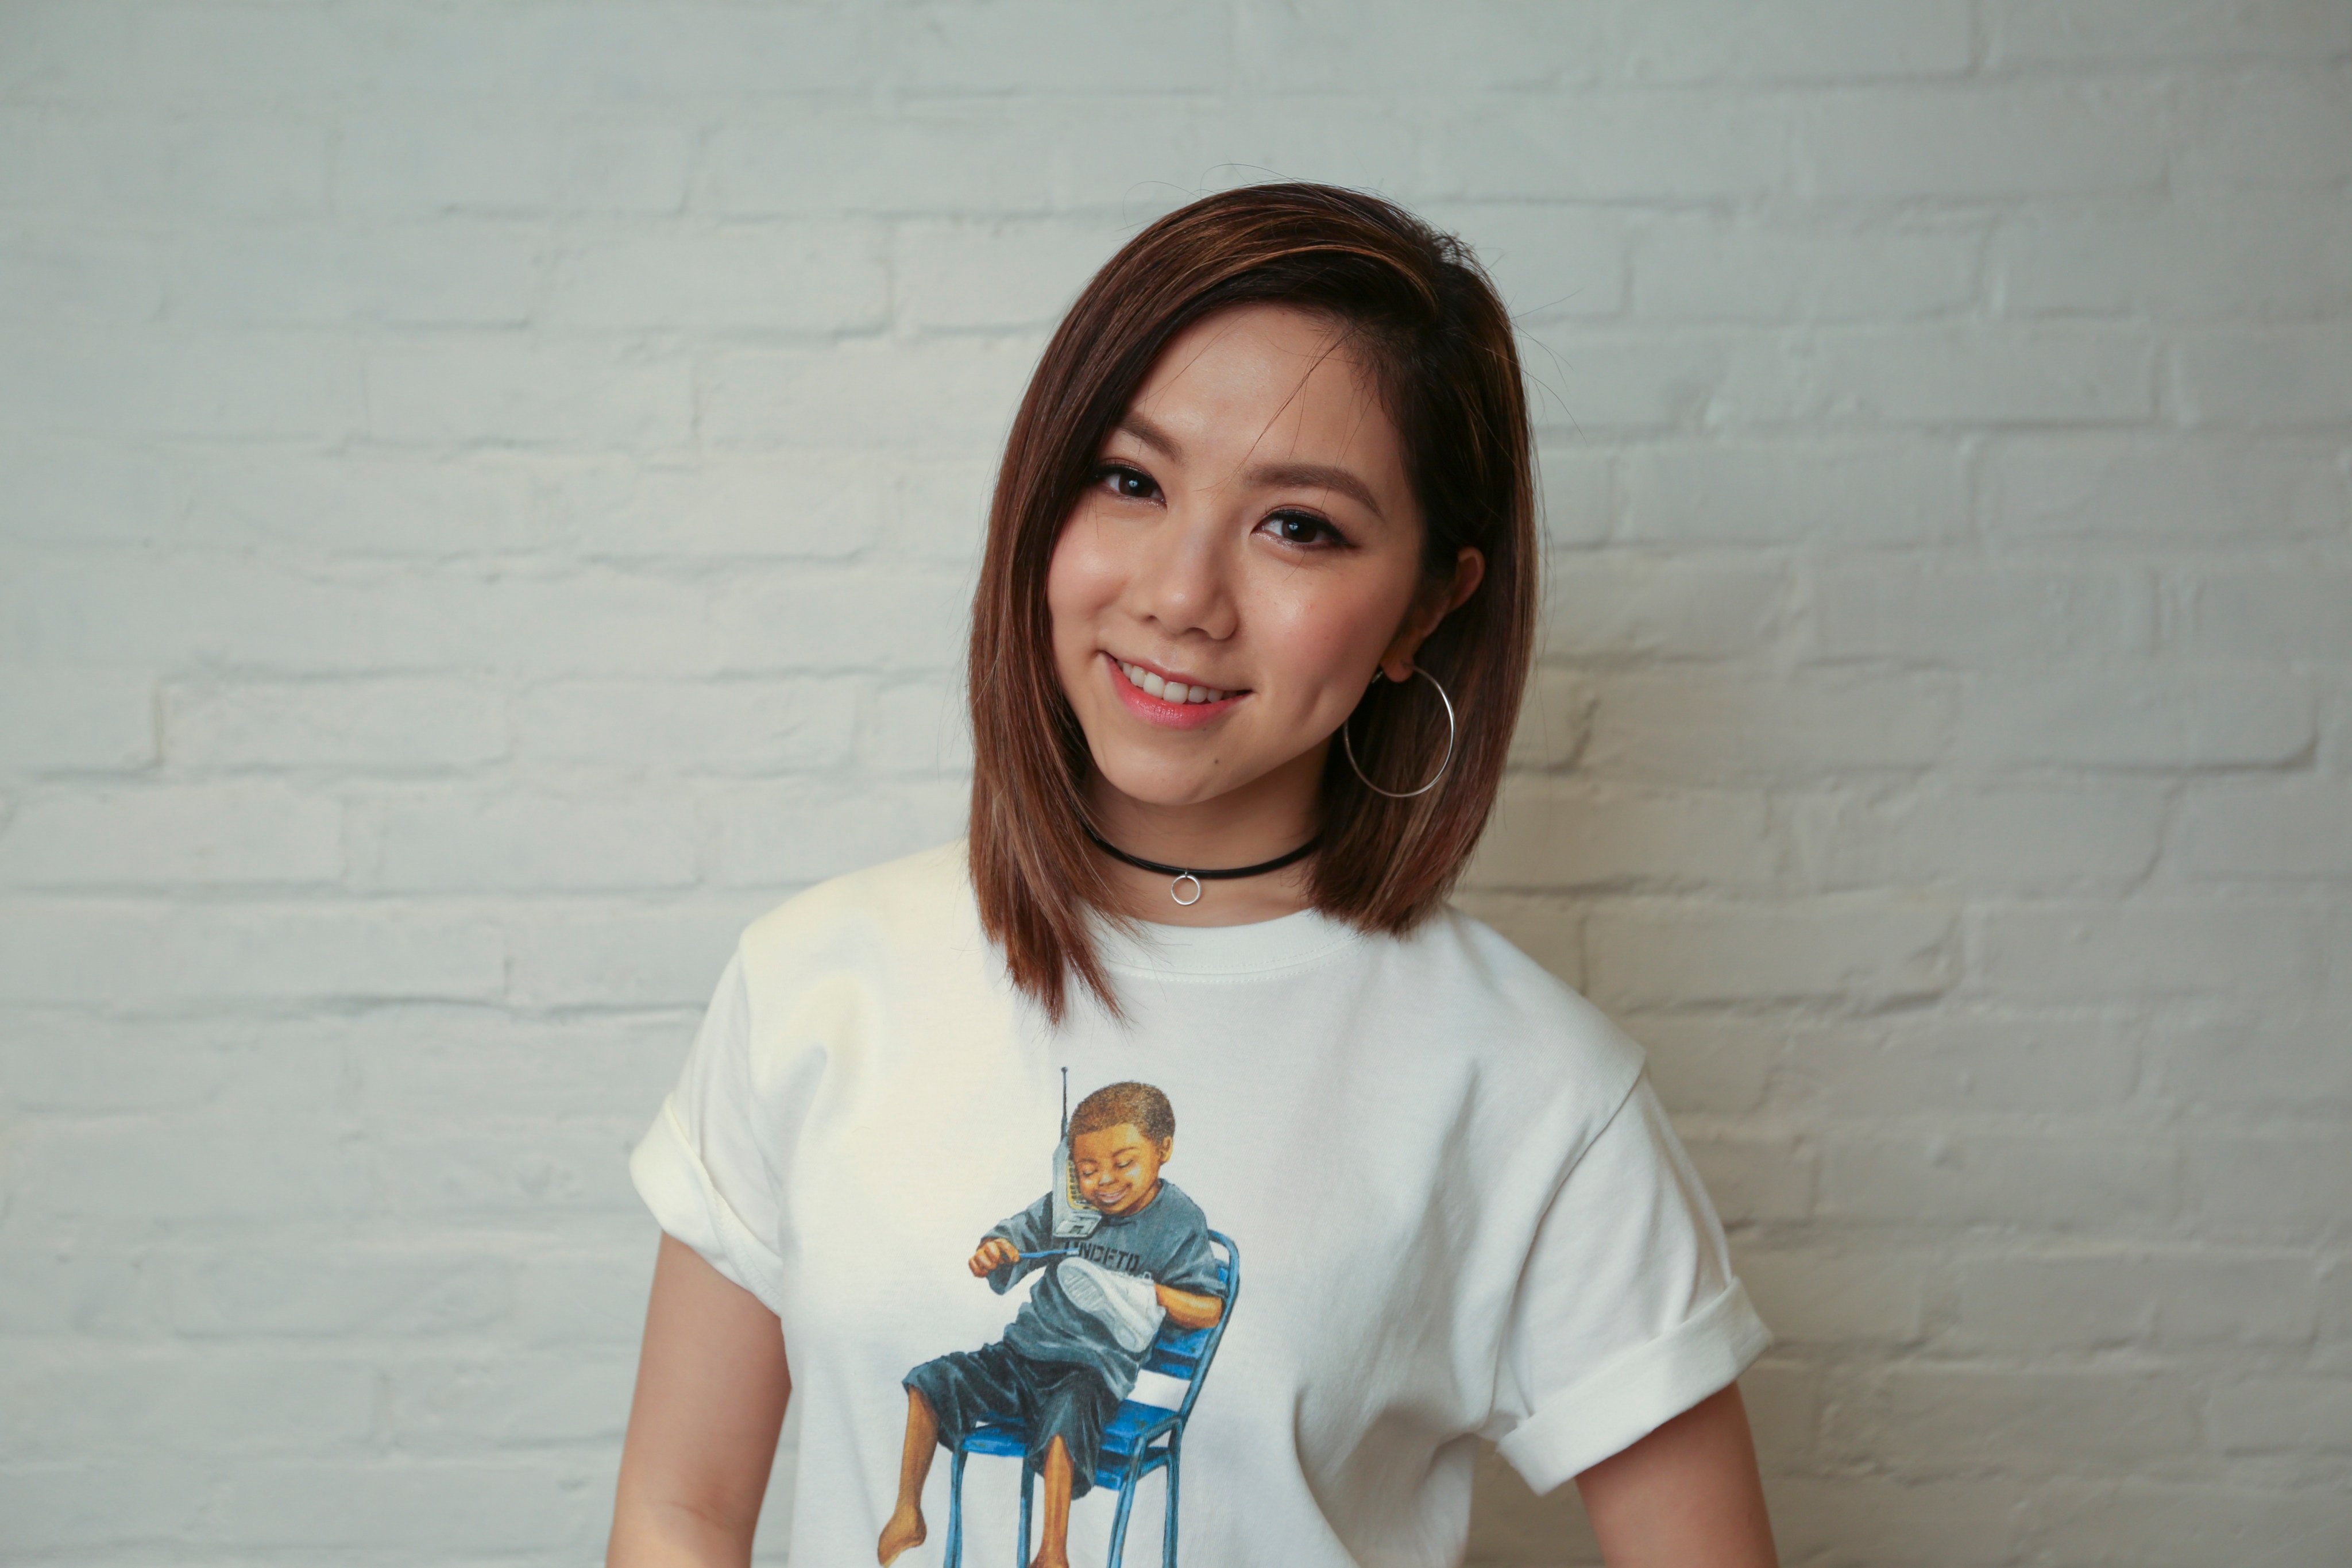 Hong Kong singer Gloria Tang, also known by her stage name G.E.M., featured in a fictitious article promoting a financial investment app. Photo: Xiaomei Chen